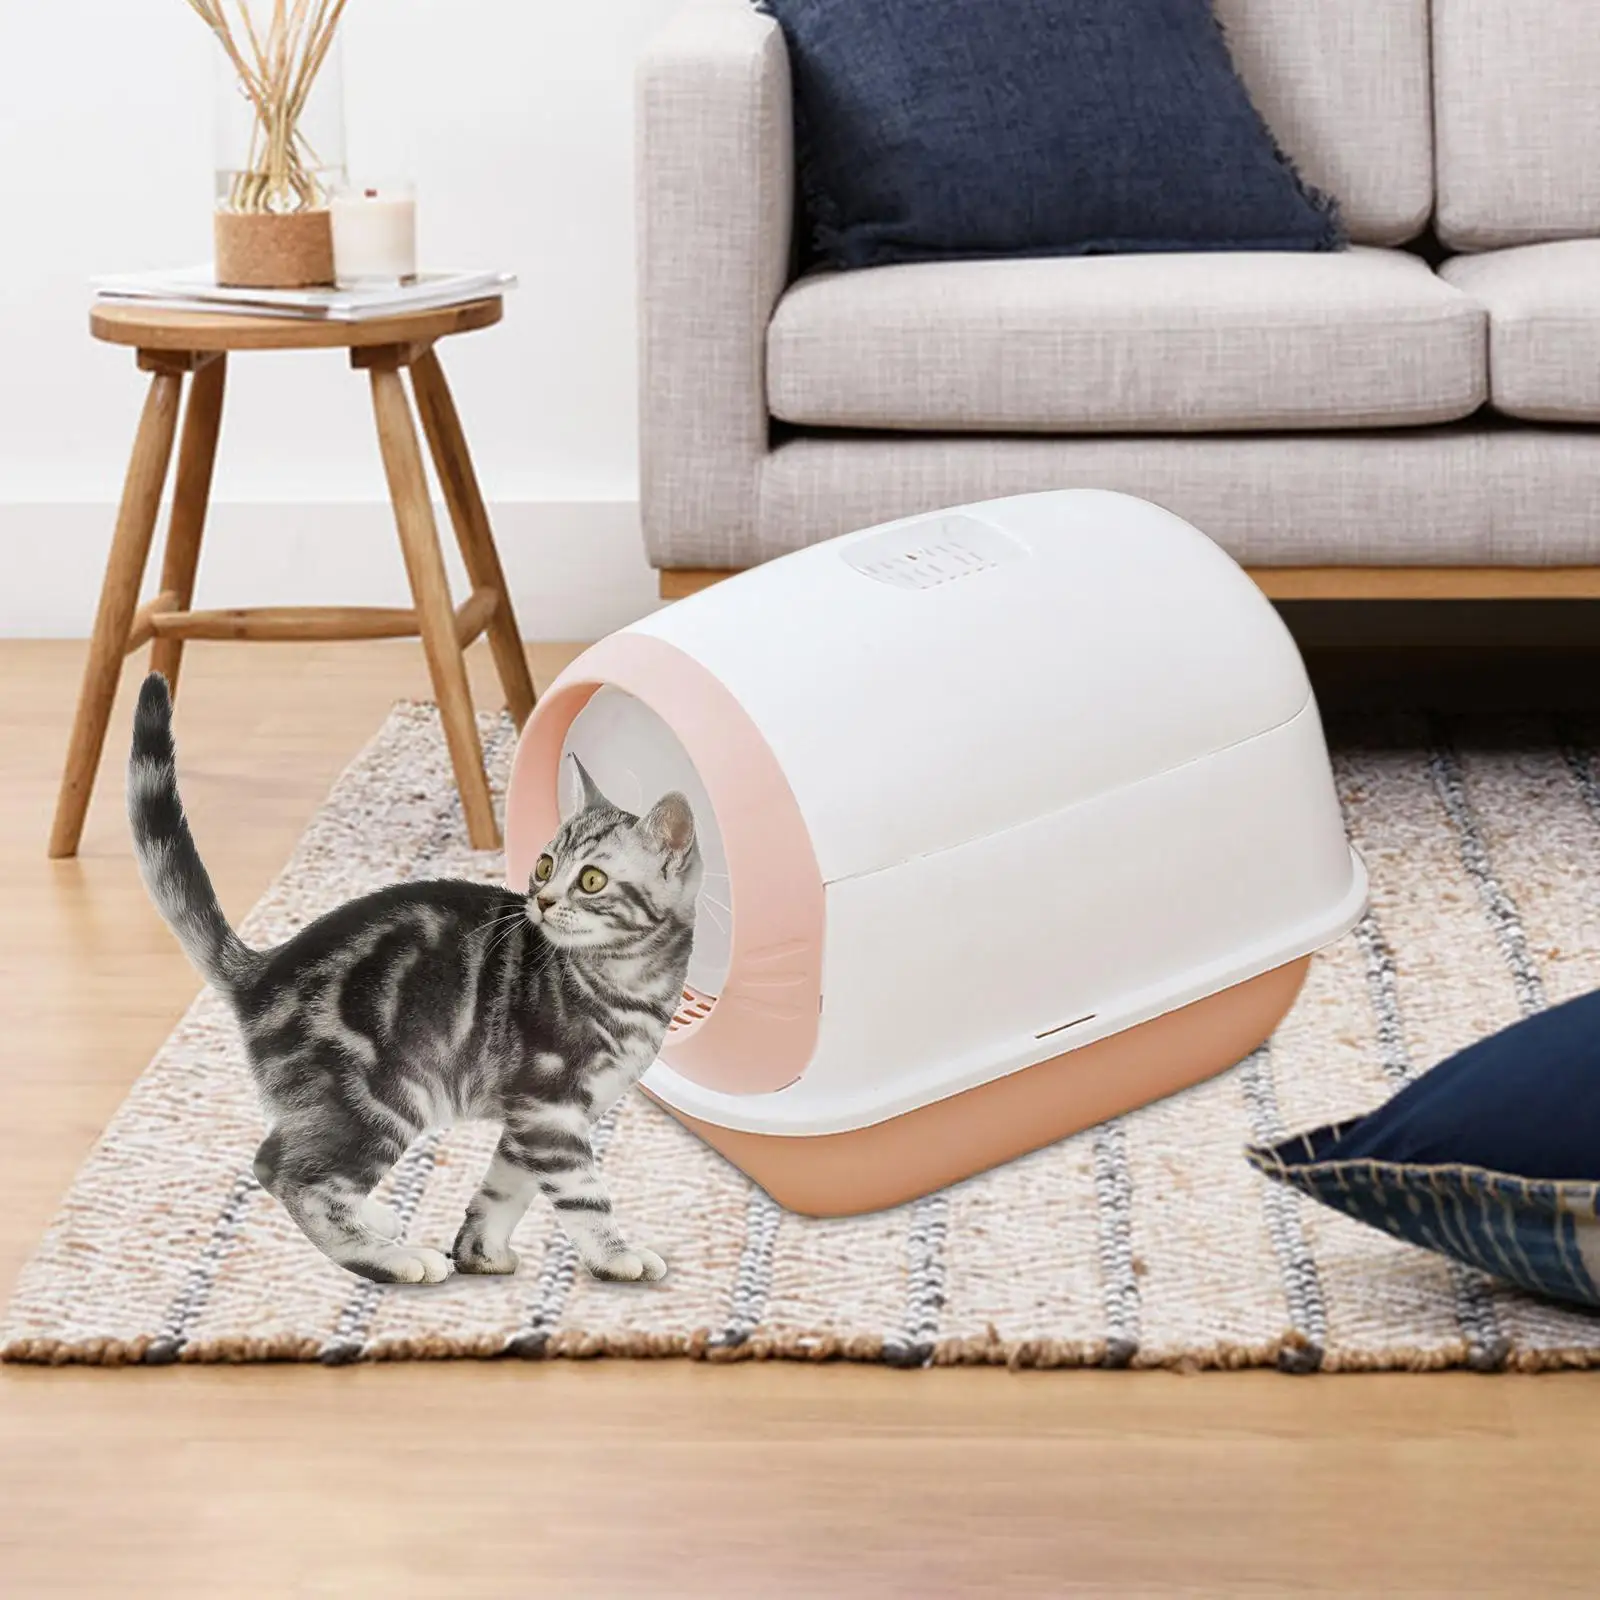 Pet Litter Tray Enclosed Potty Toilet Bedpan Pan Hooded Cat Litter Box for Kennel